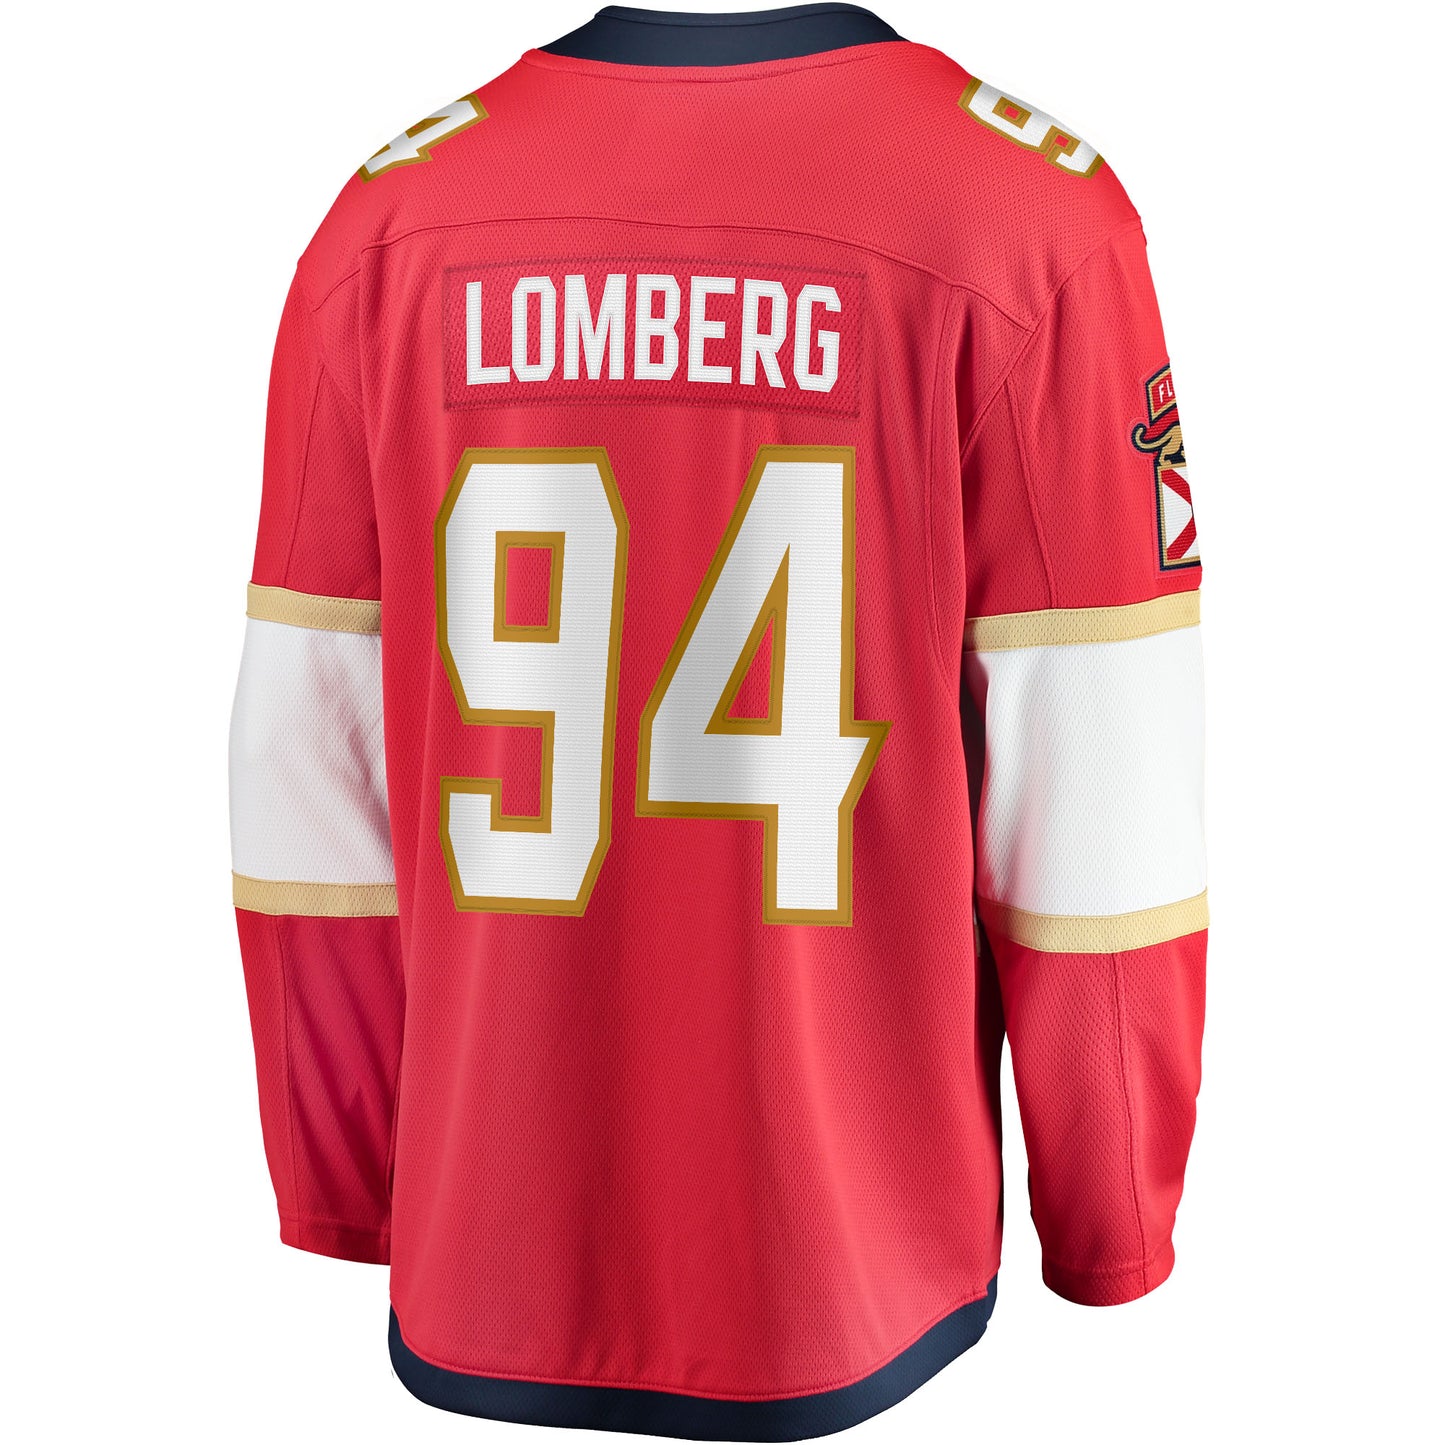 Ryan Lomberg Florida Panthers Fanatics Branded Home Breakaway Player Jersey - Red